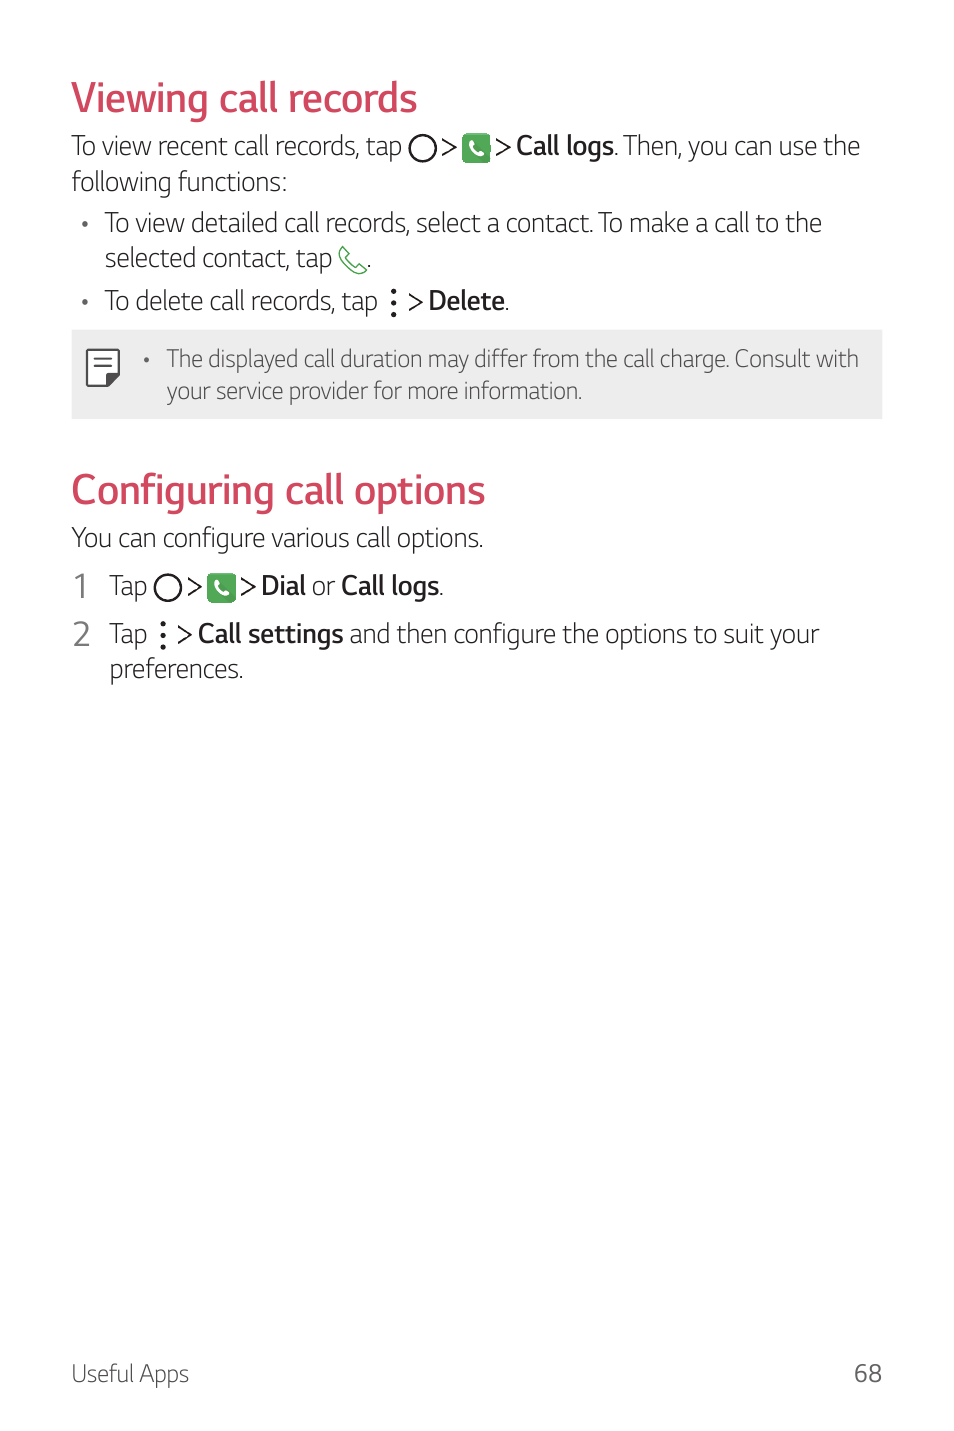 Viewing call records, Configuring call options | LG G6 H872 User Manual | Page 69 / 183